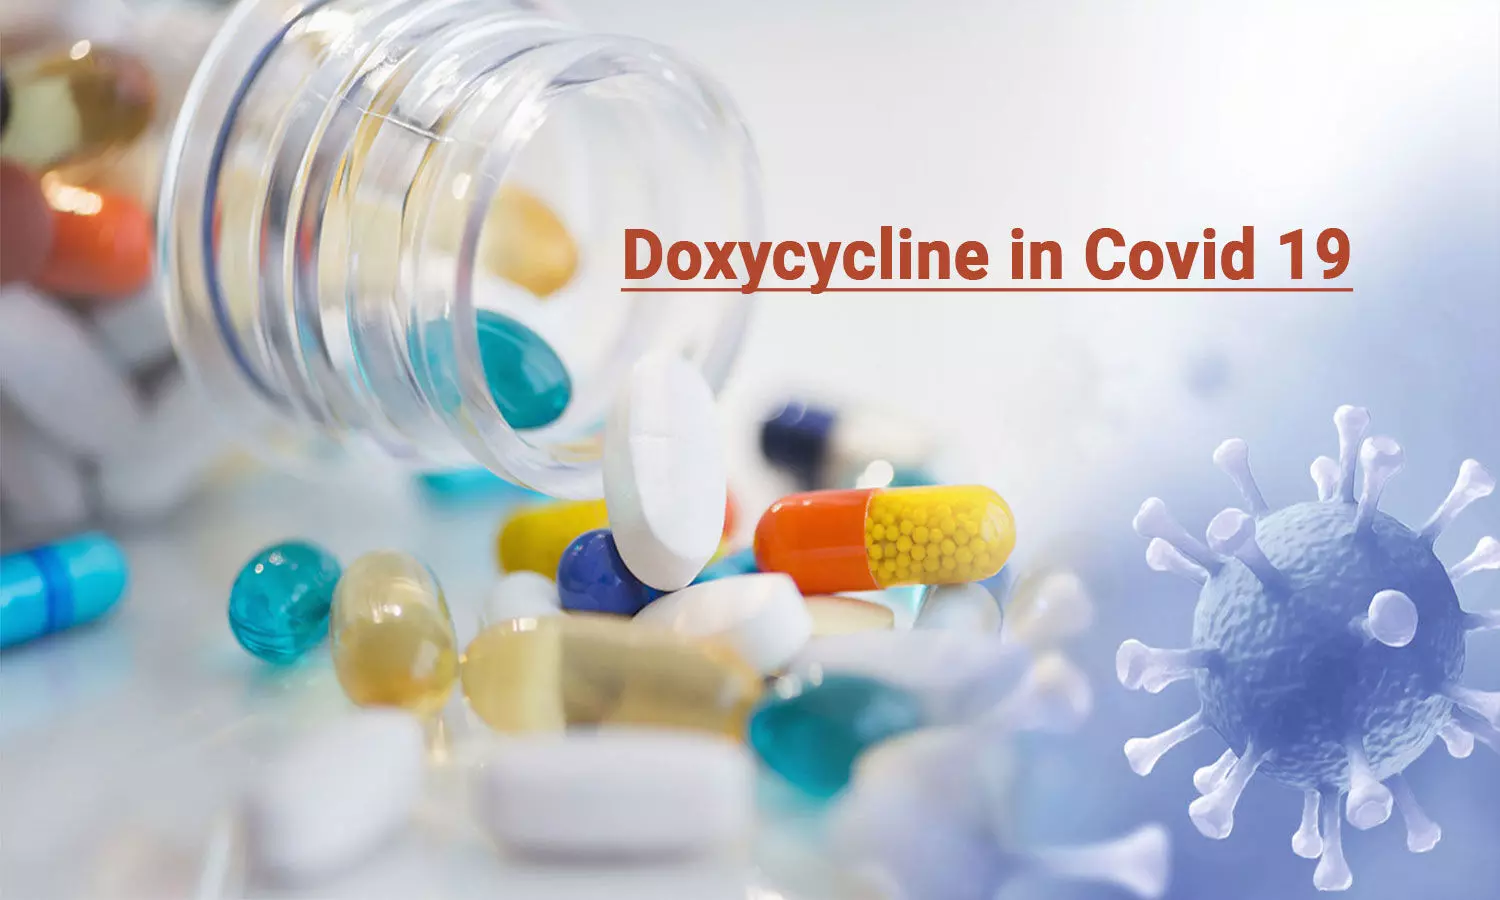 Doxycycline - Rationale for Use in COVID-19